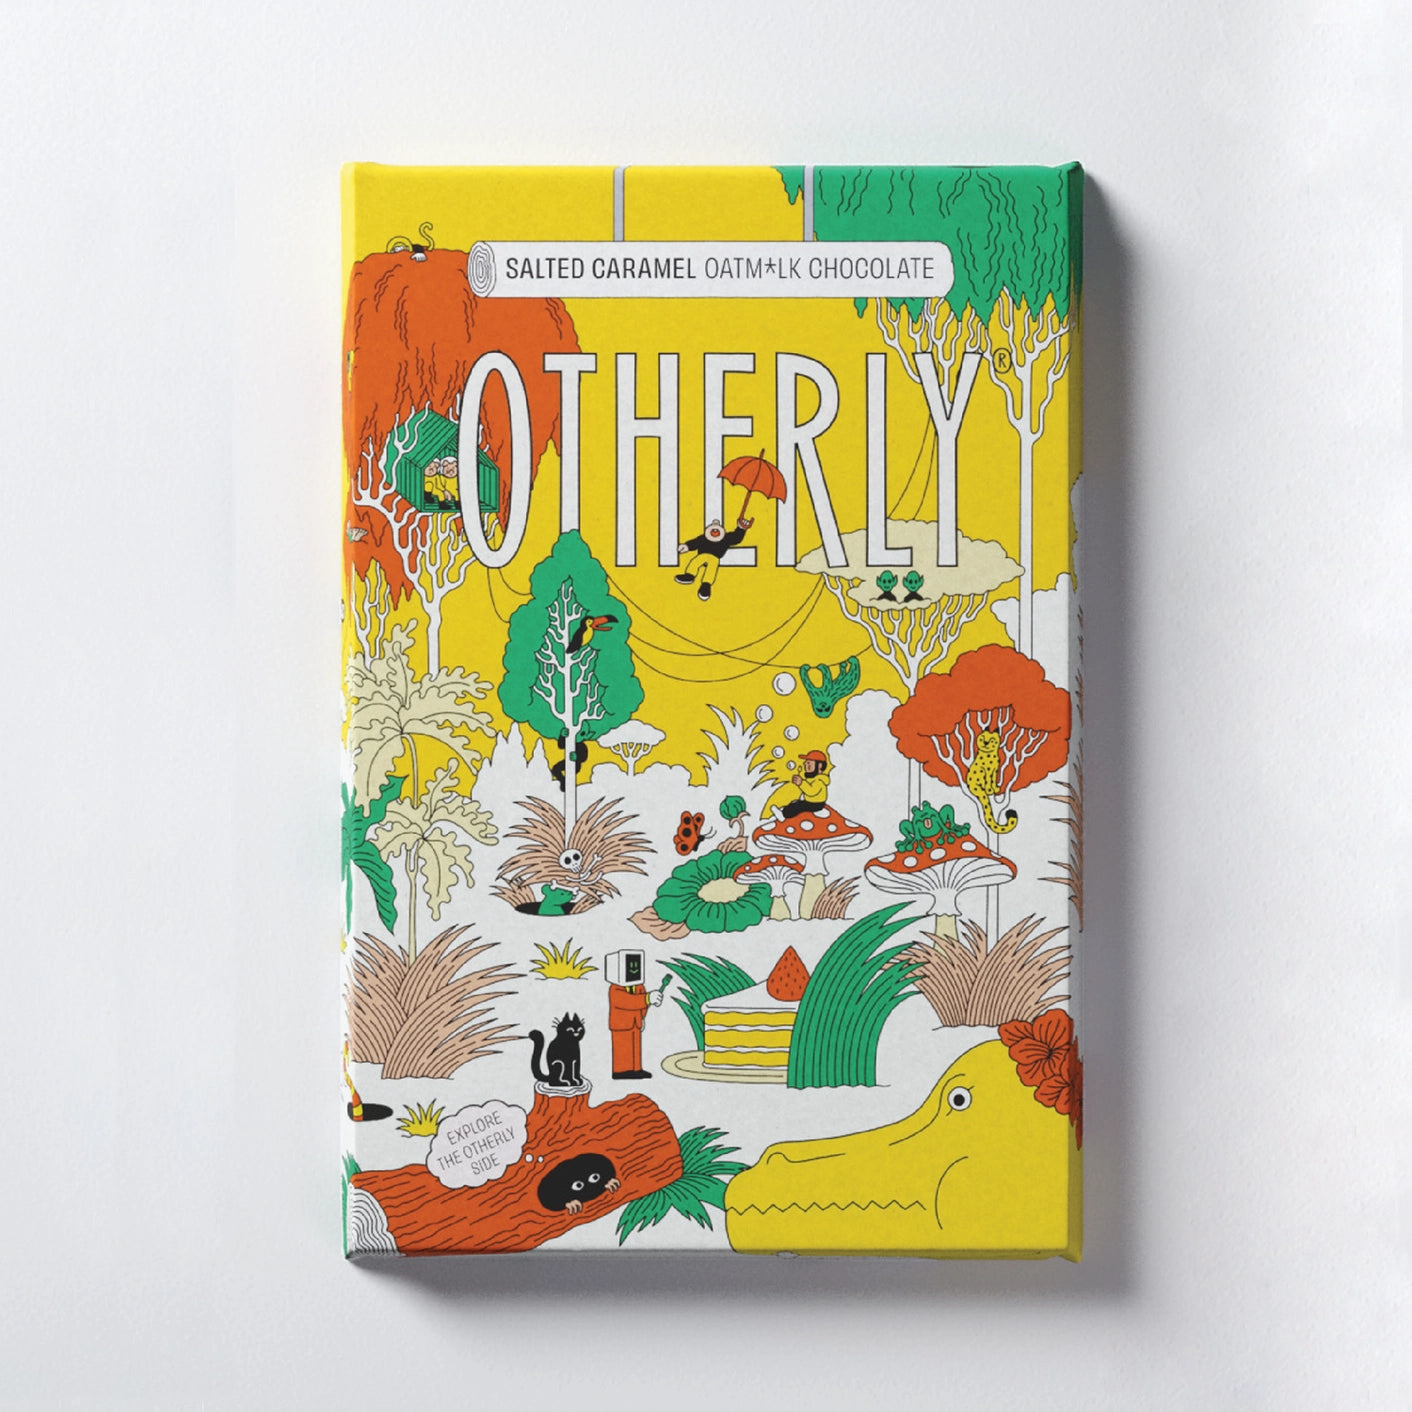 Creamy vegan oat milk chocolate bar wrapped in an illustrated wrapper featuring a wilderness with an array of characters, mushroom, trees, & animals.